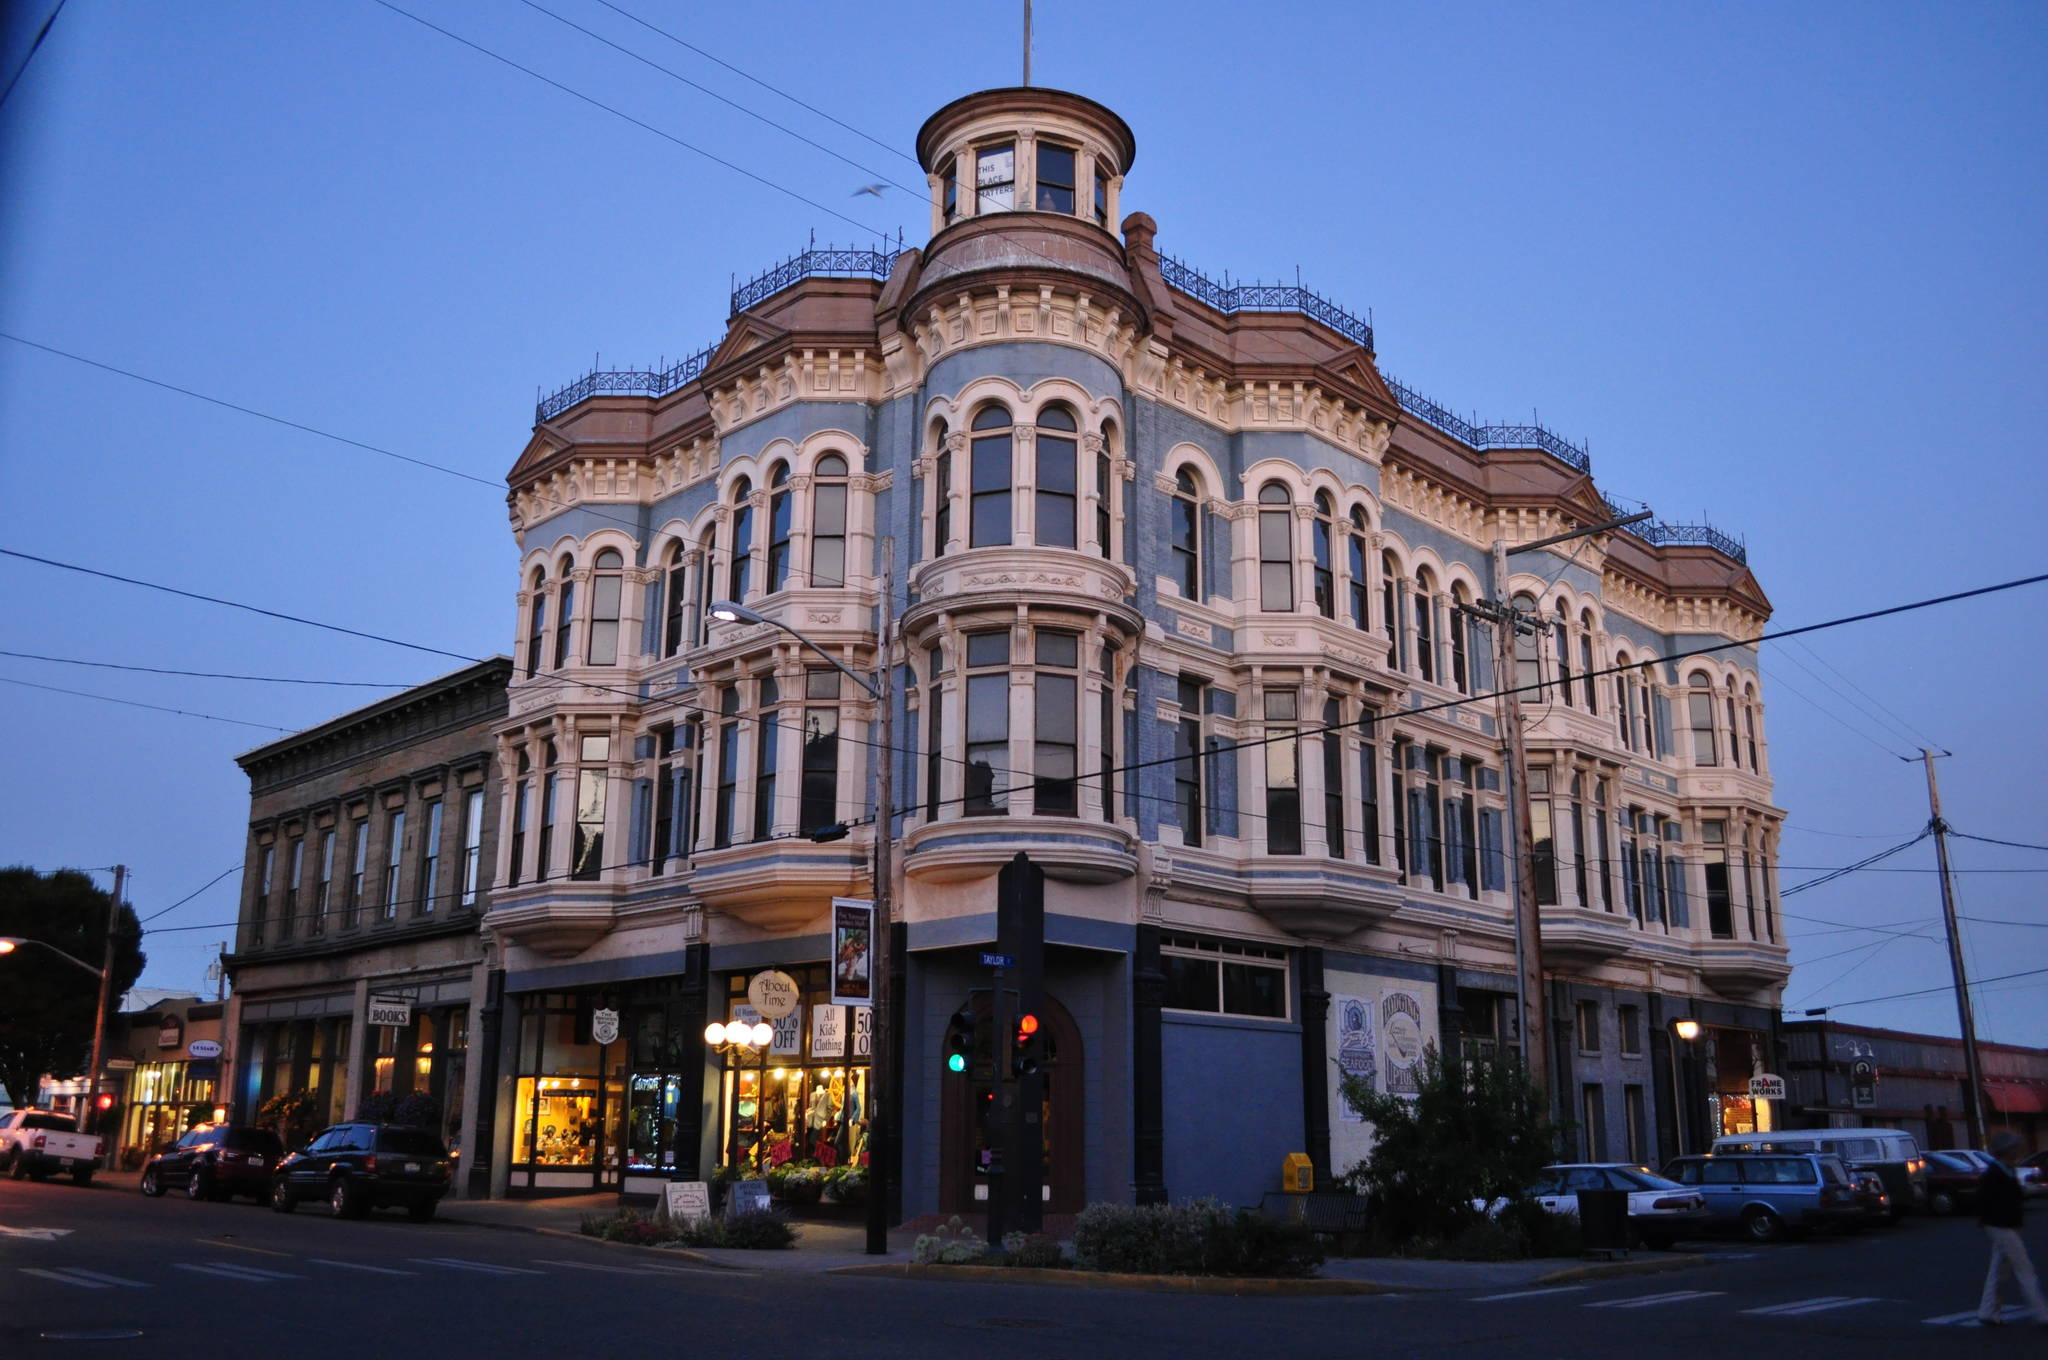 The Hastings Building in Port Townsend. Photo via Wikimedia Commons